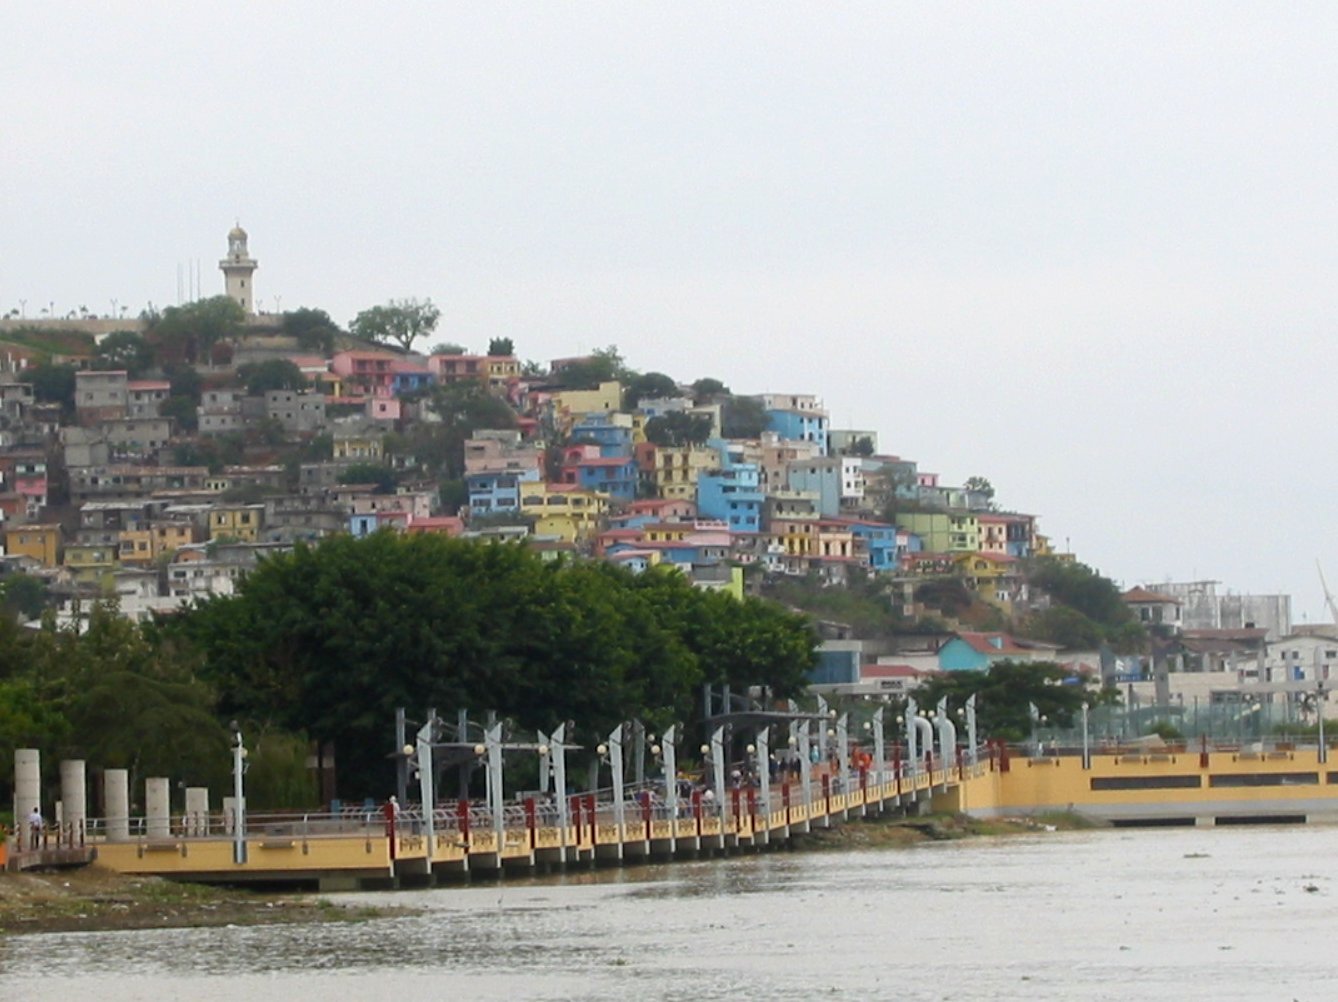 View of Las Penas from the Malecon